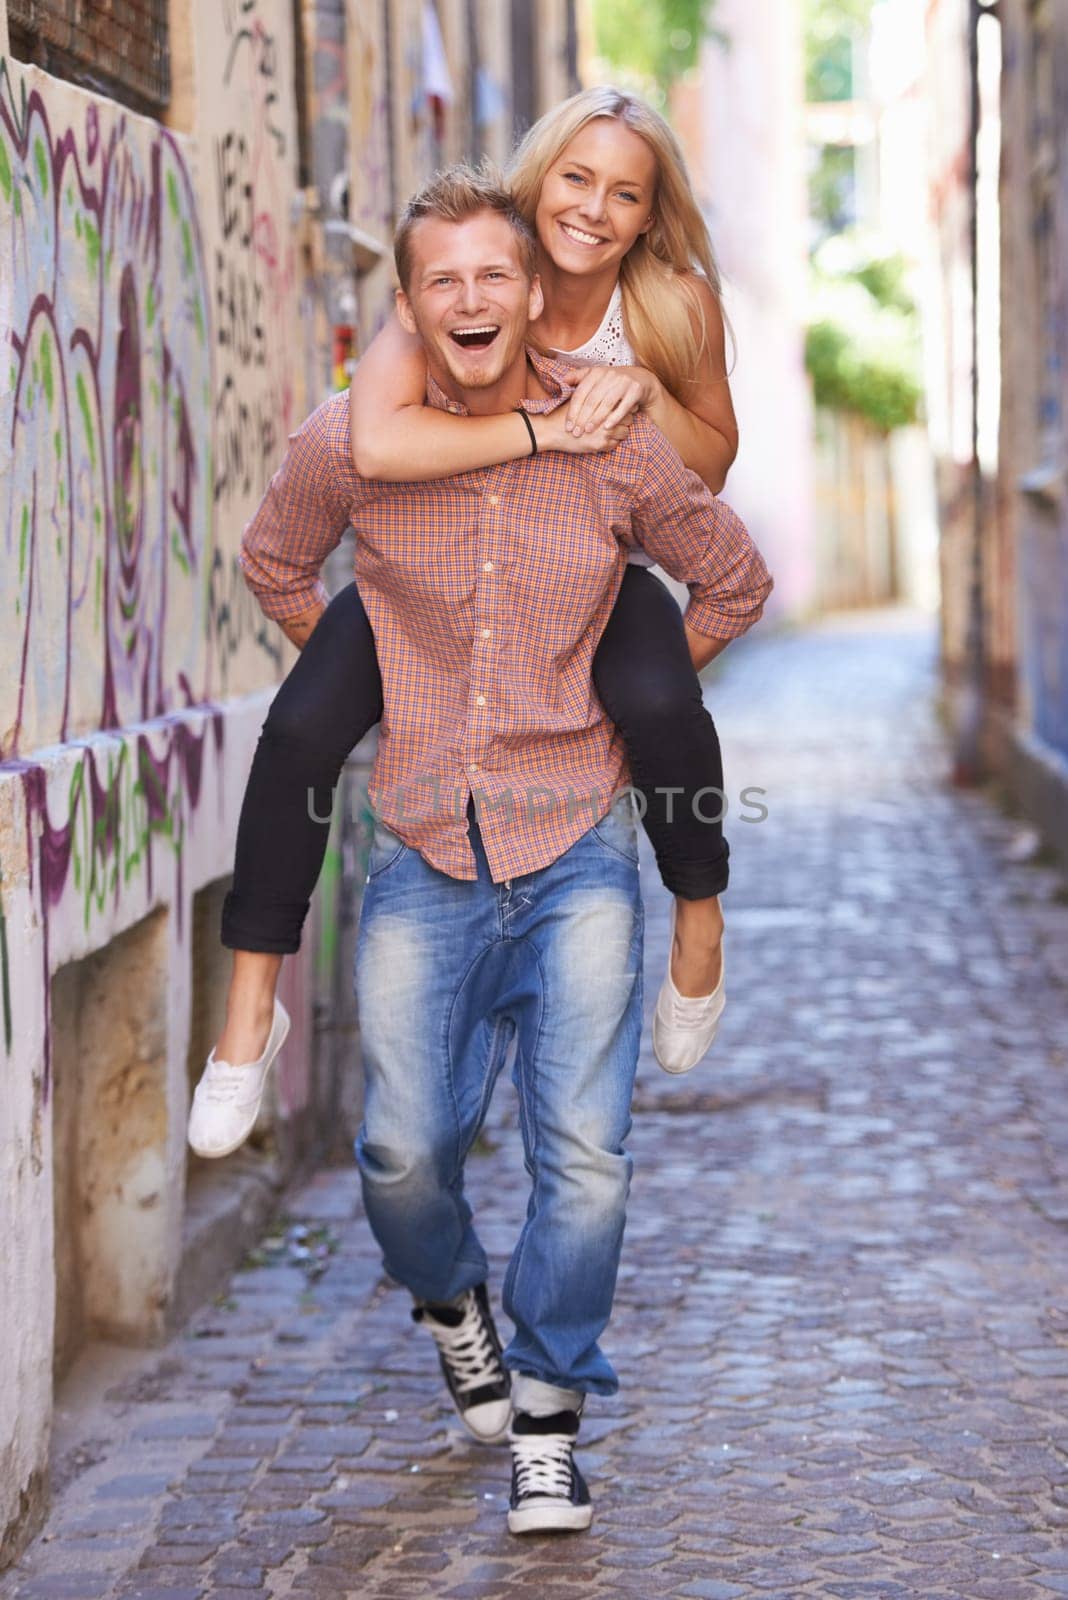 Couple, happy or piggyback on street in city, fun support or romance in committed relationship. Excited man, woman and smile for adventure in amsterdam, travel and care for love together on honeymoon.